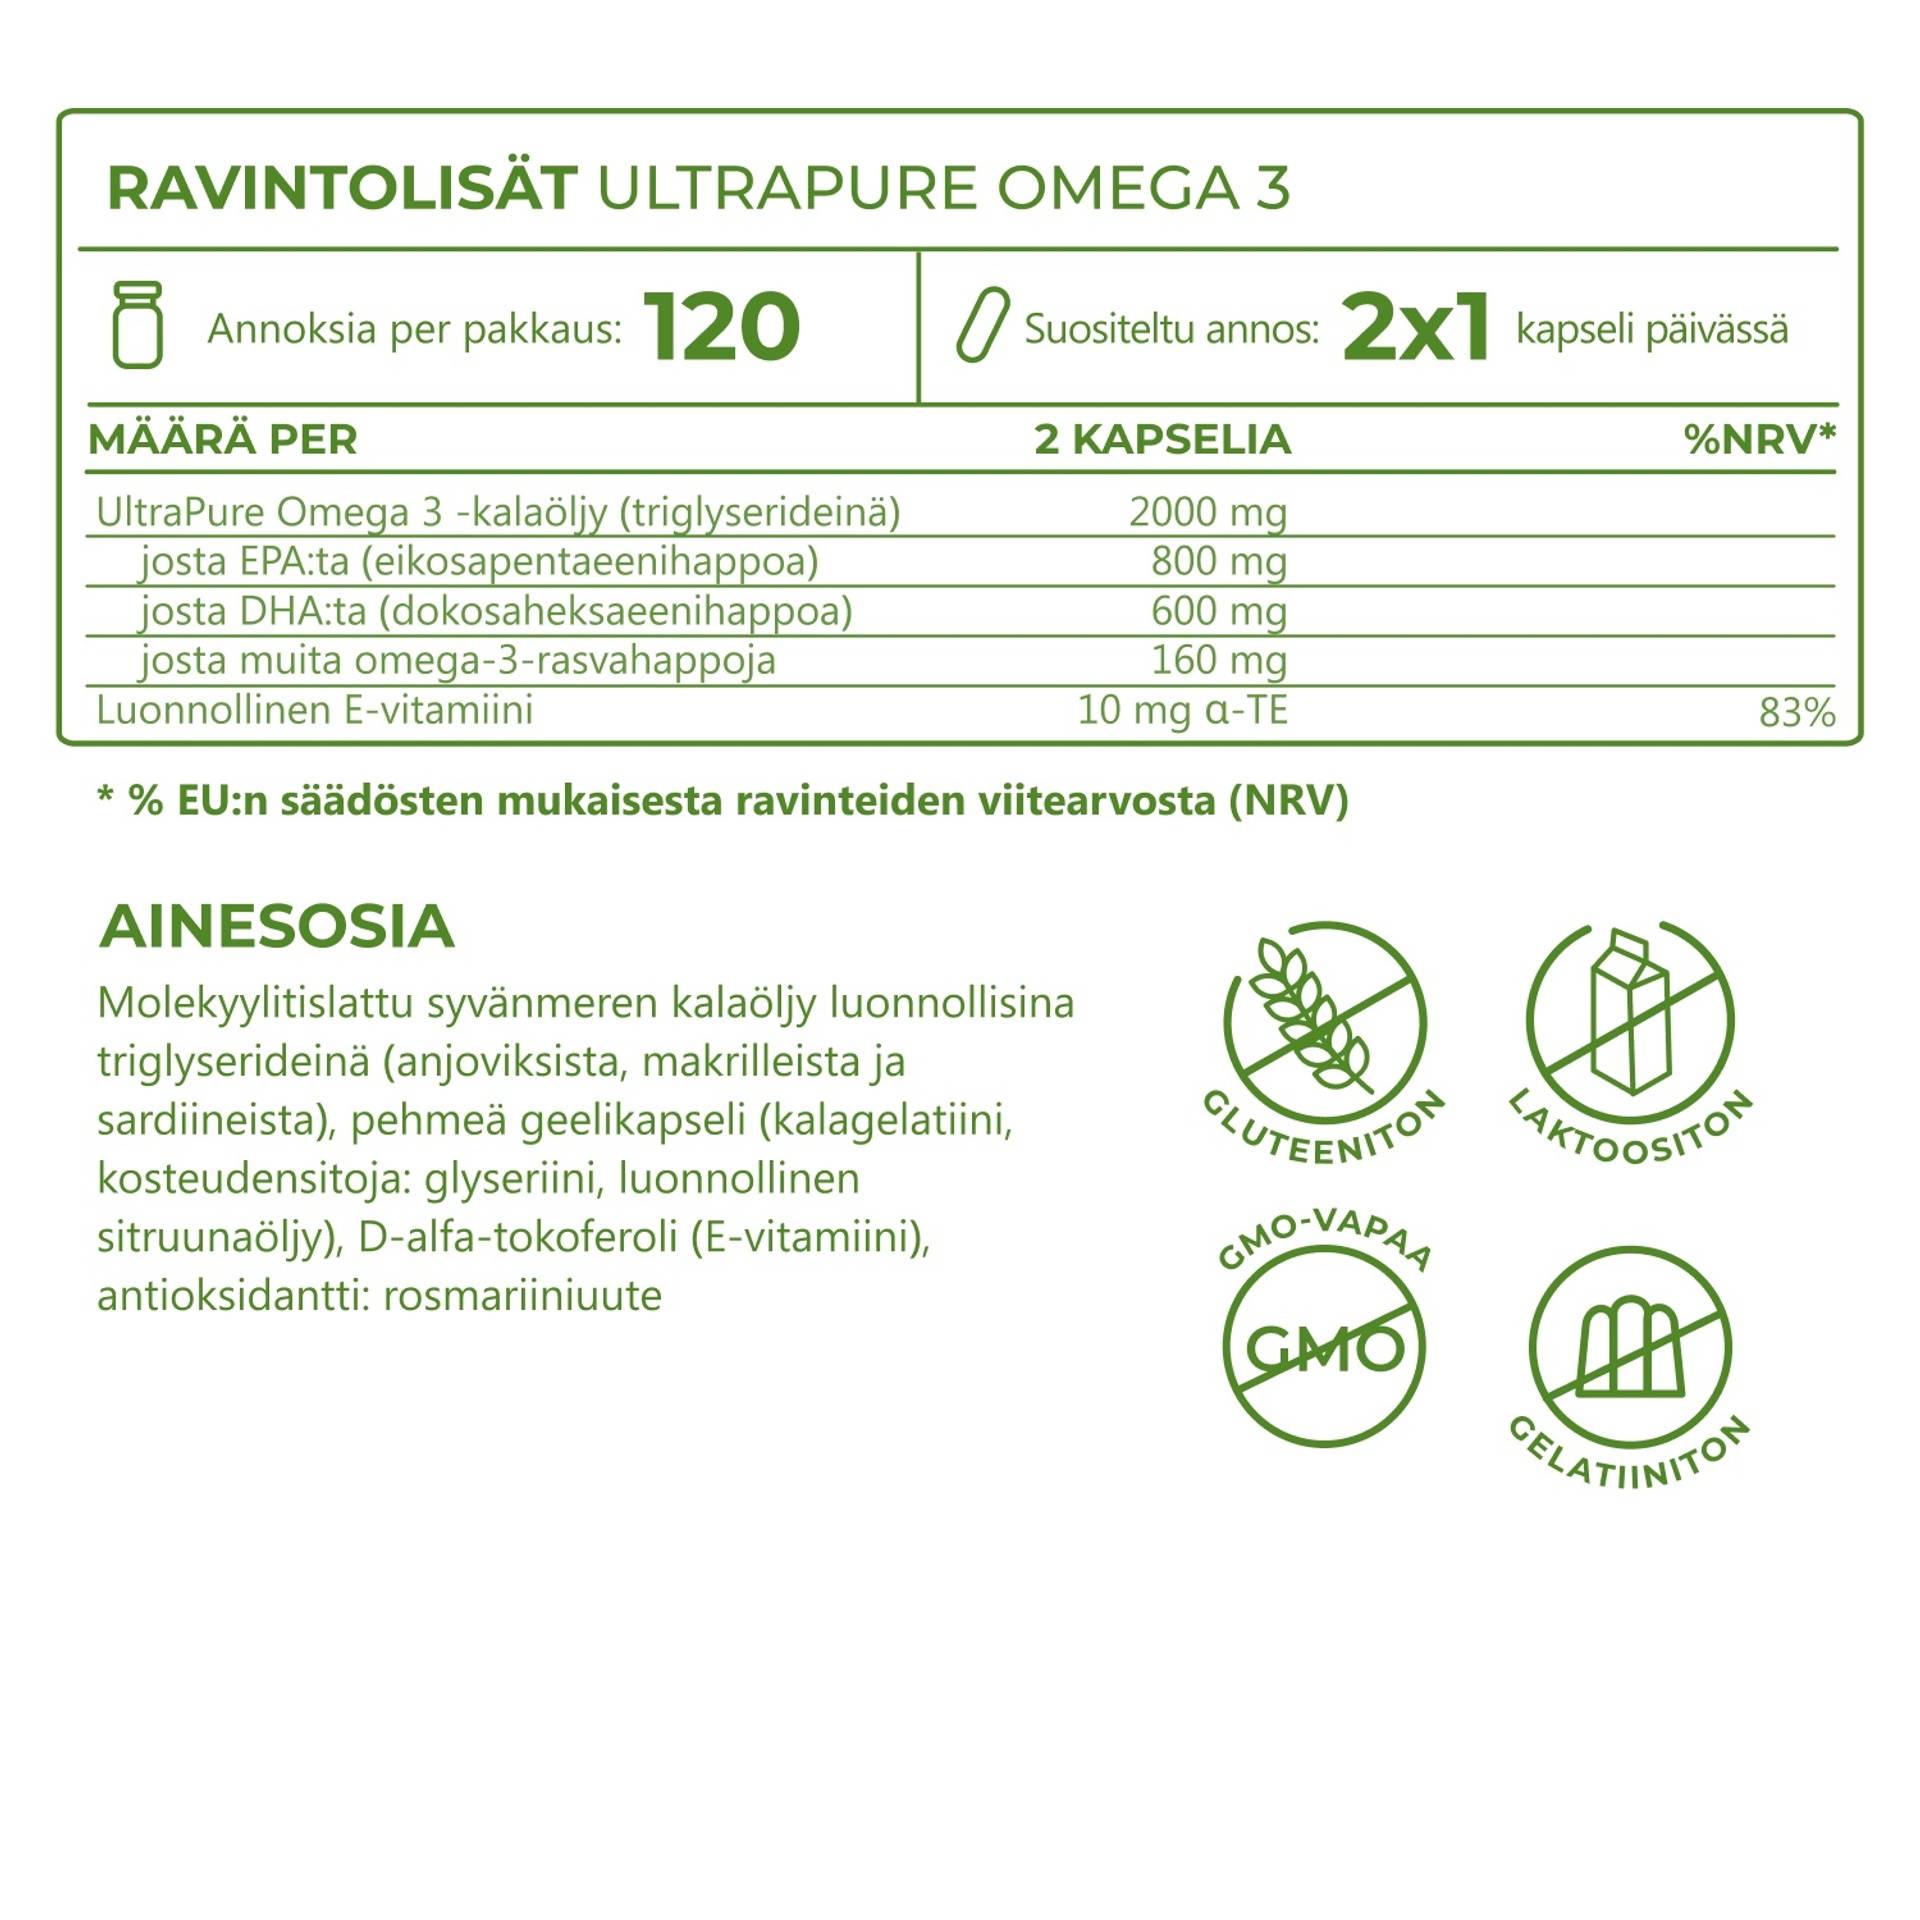 5_FI_Ingredients_Ultrapure Omega 3_6852-04.png